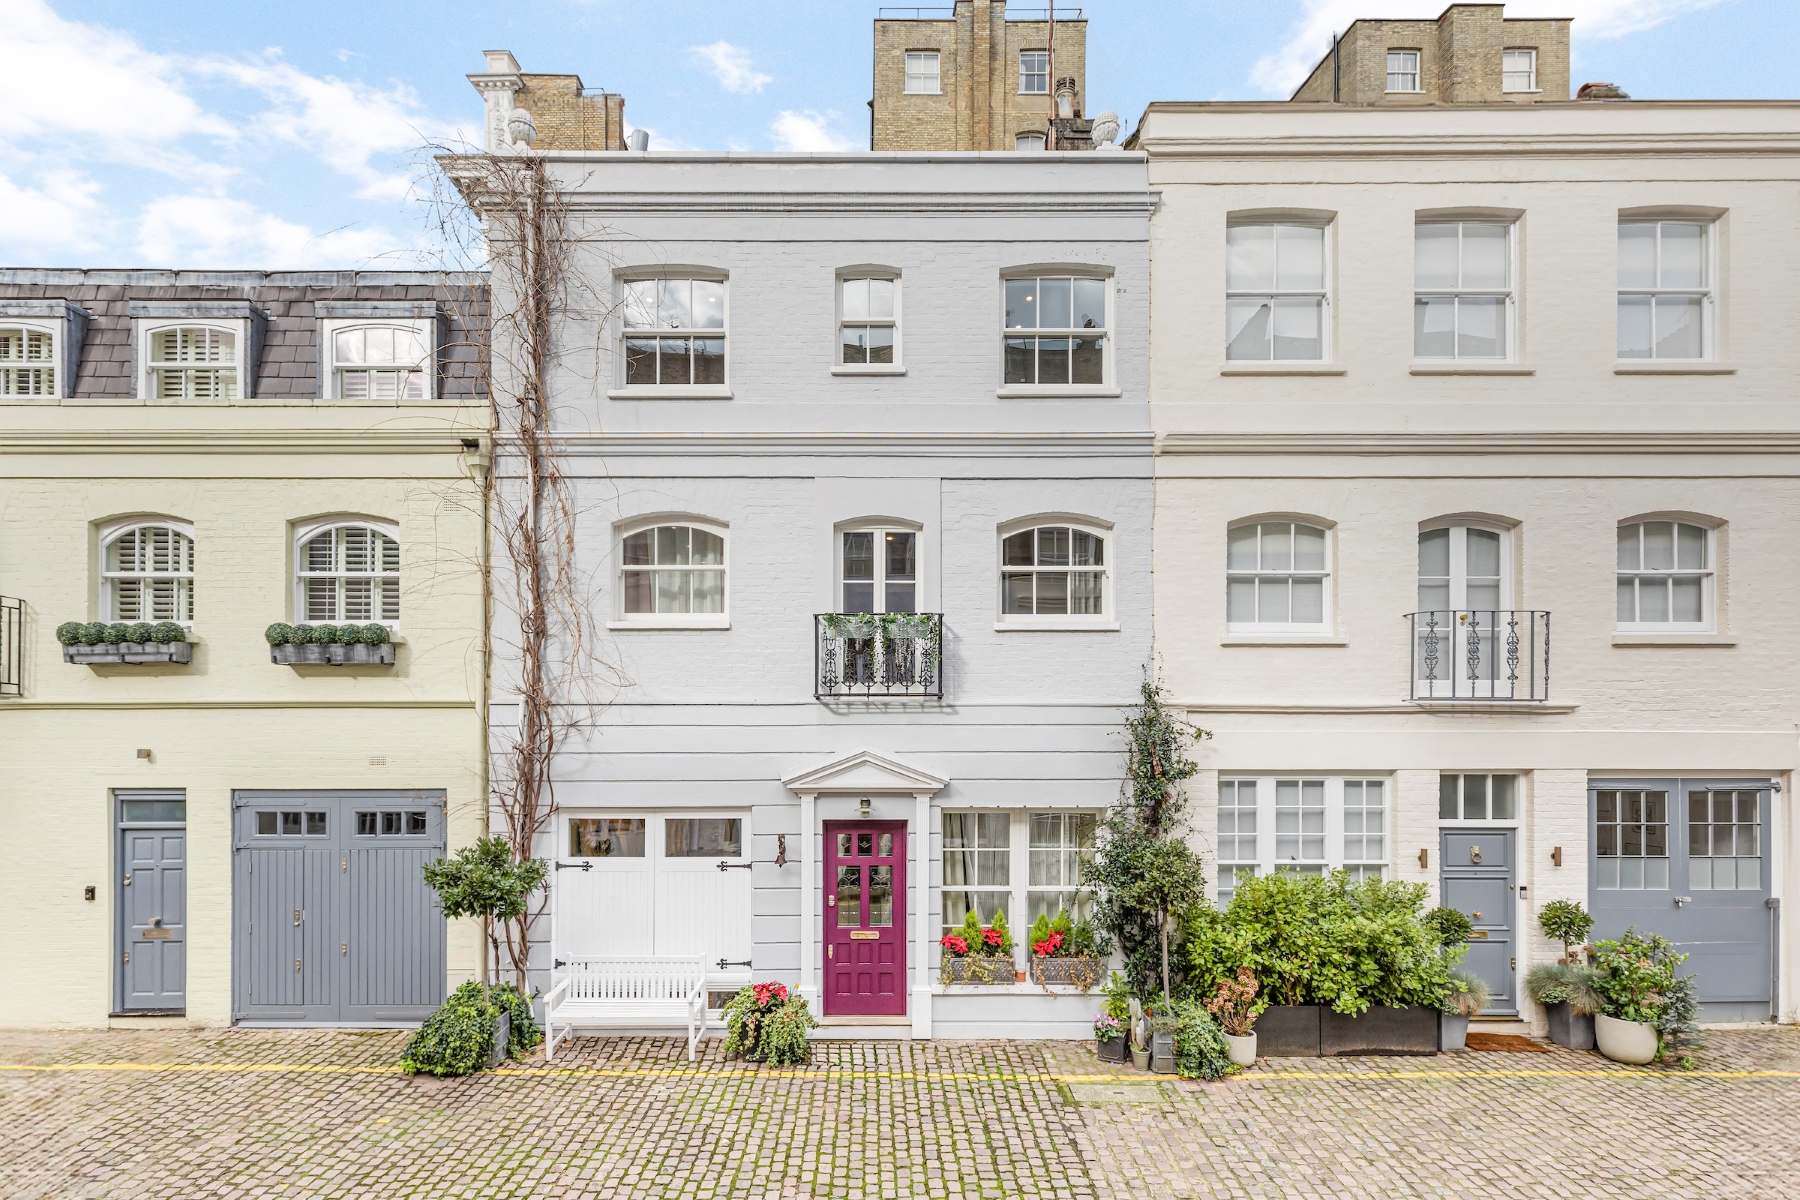 Wonderful five-bedroom house in the heart of South Kensington